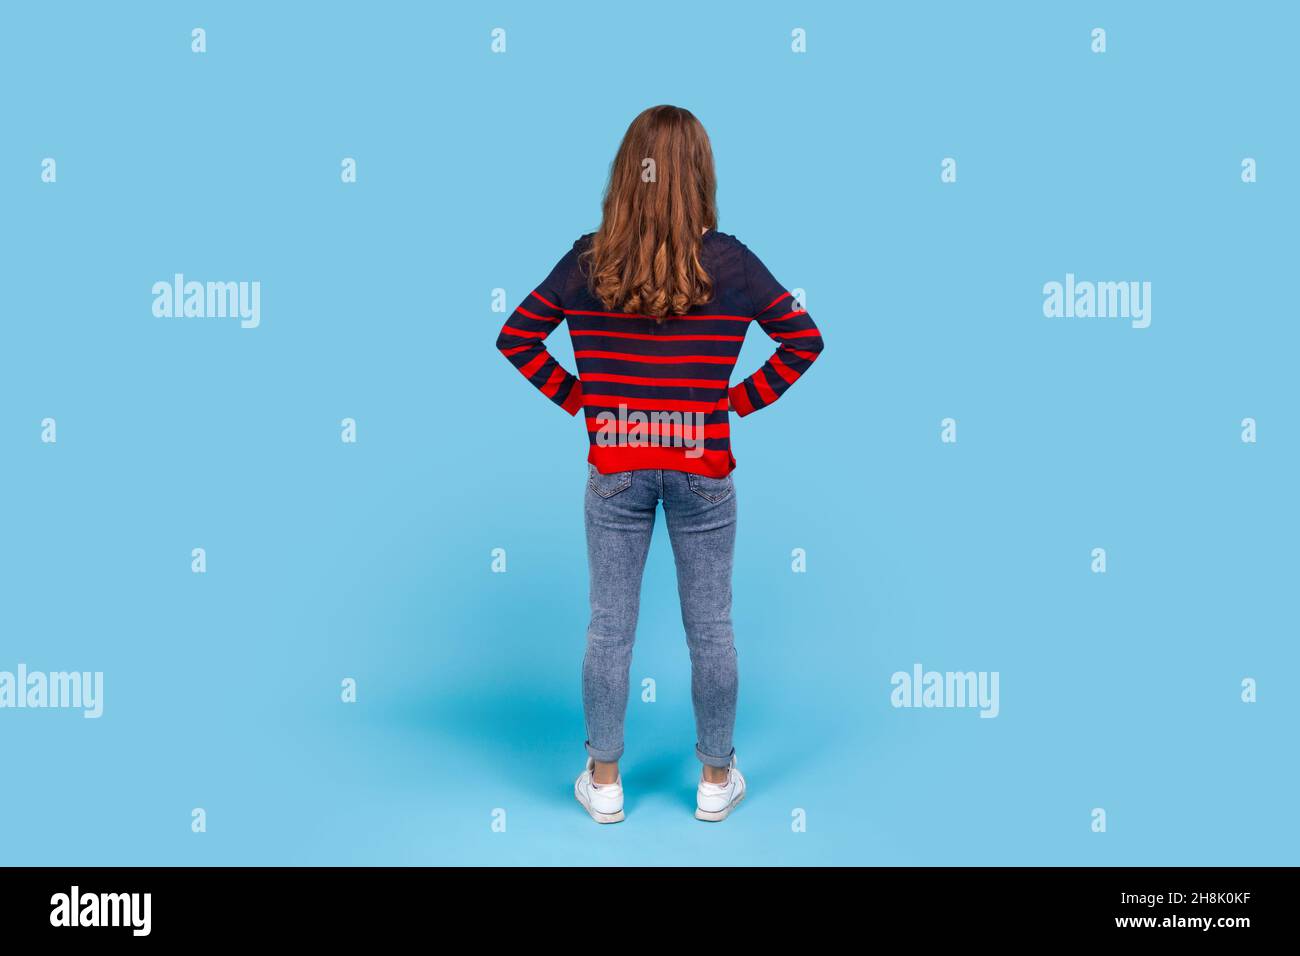 Full length back portrait of woman wearing striped casual style sweater, posing backwards with hands on hips, standing calm unrecognizable, waiting. Indoor studio shot isolated on blue background. Stock Photo